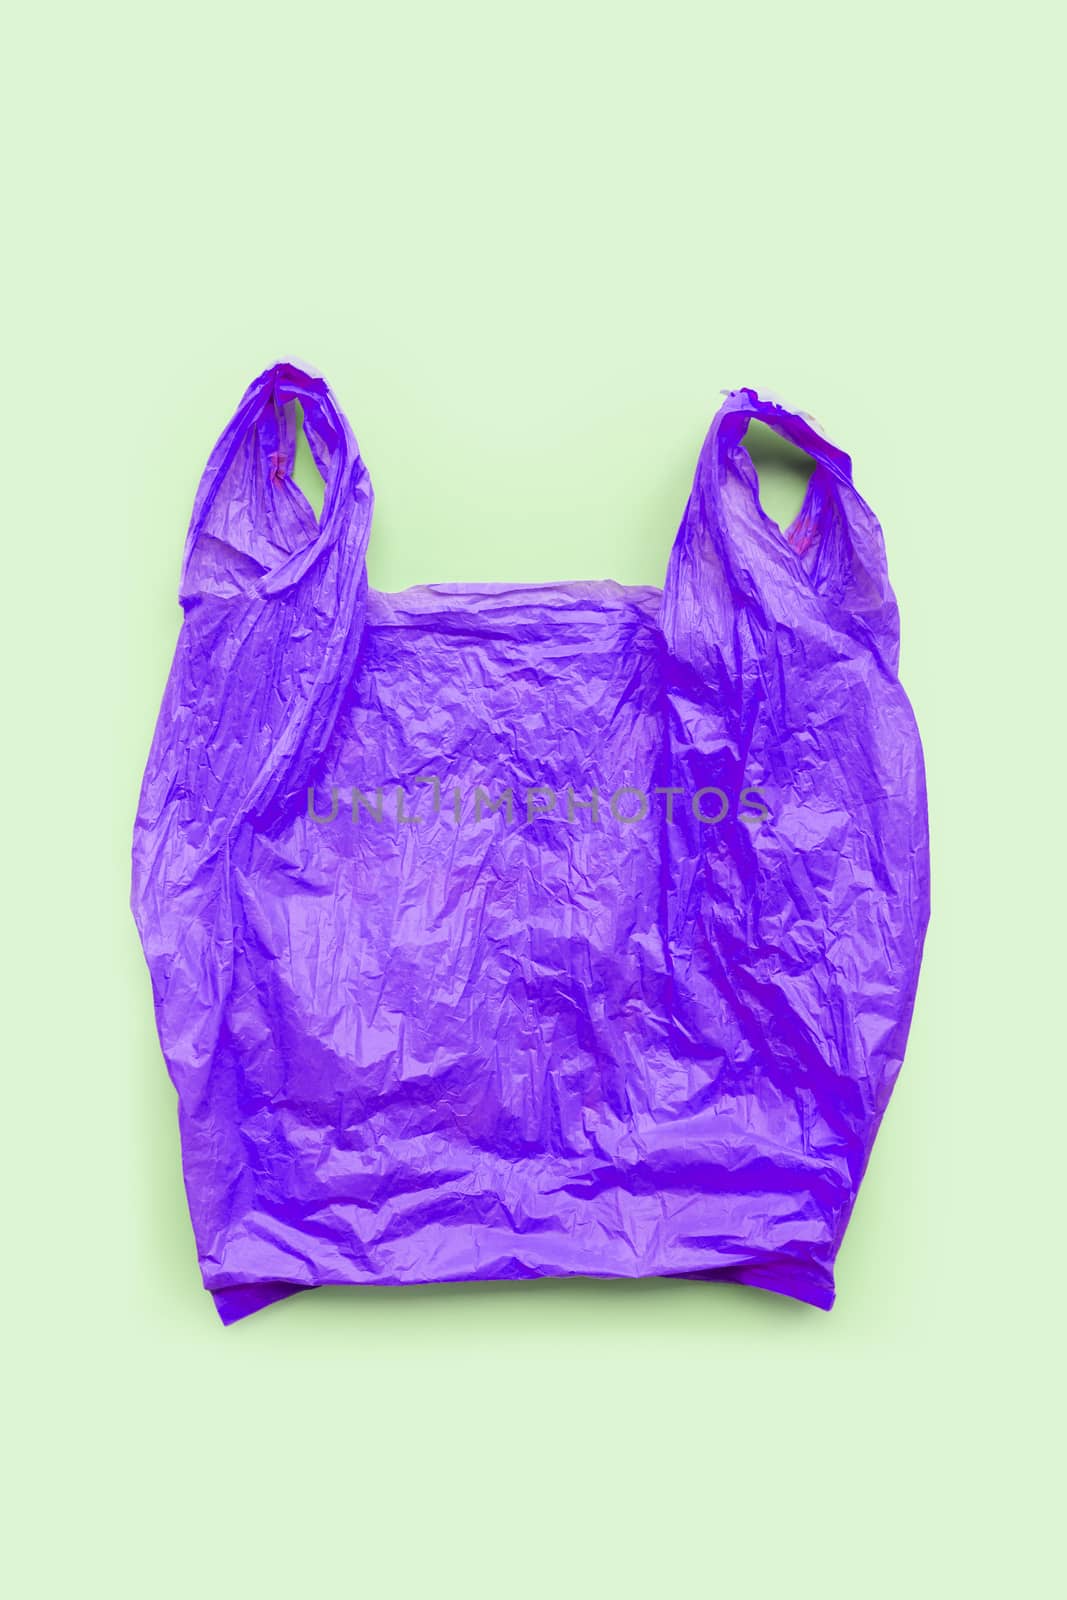 Purple plastic bag on green background. Environment pollution co by Bowonpat